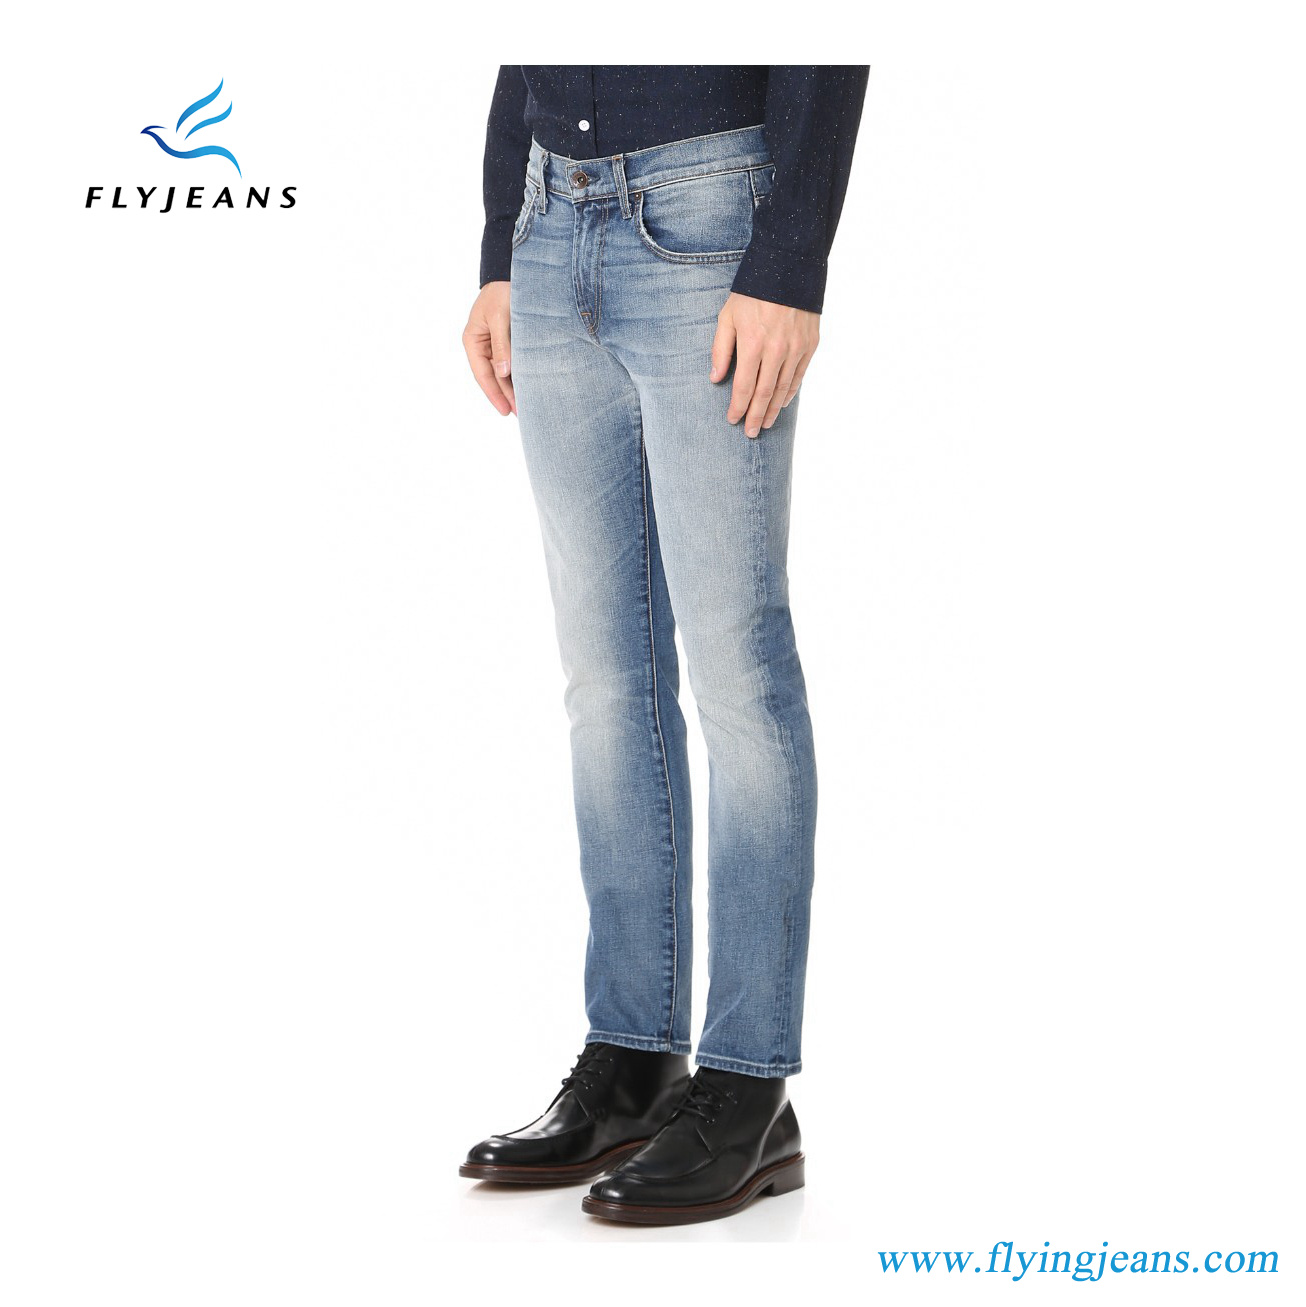 Slim Denim Jeans with Heavy Fading and Shredded Holes for Men by Fly Jeans